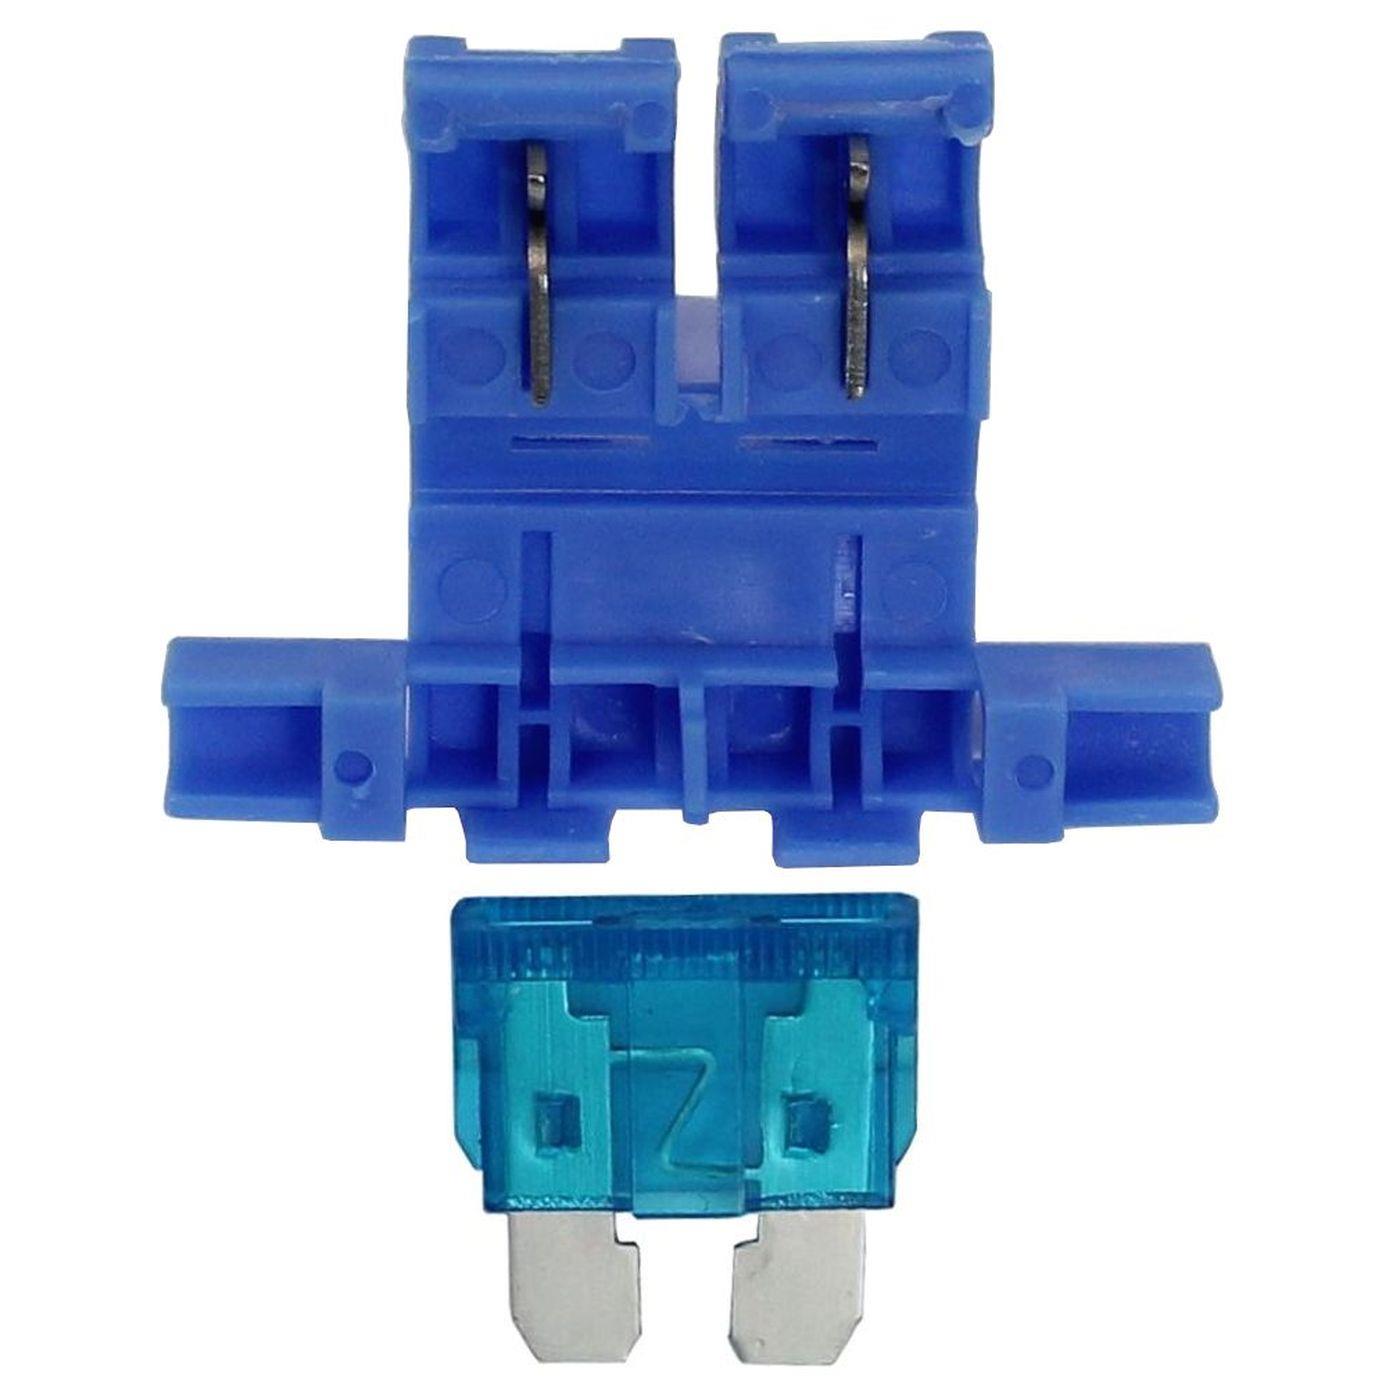 10x CAR Car Fuse holder 0,5...0,8mm² Cable cross section + 19mm 15A Flat fuse Insulation displacement technology